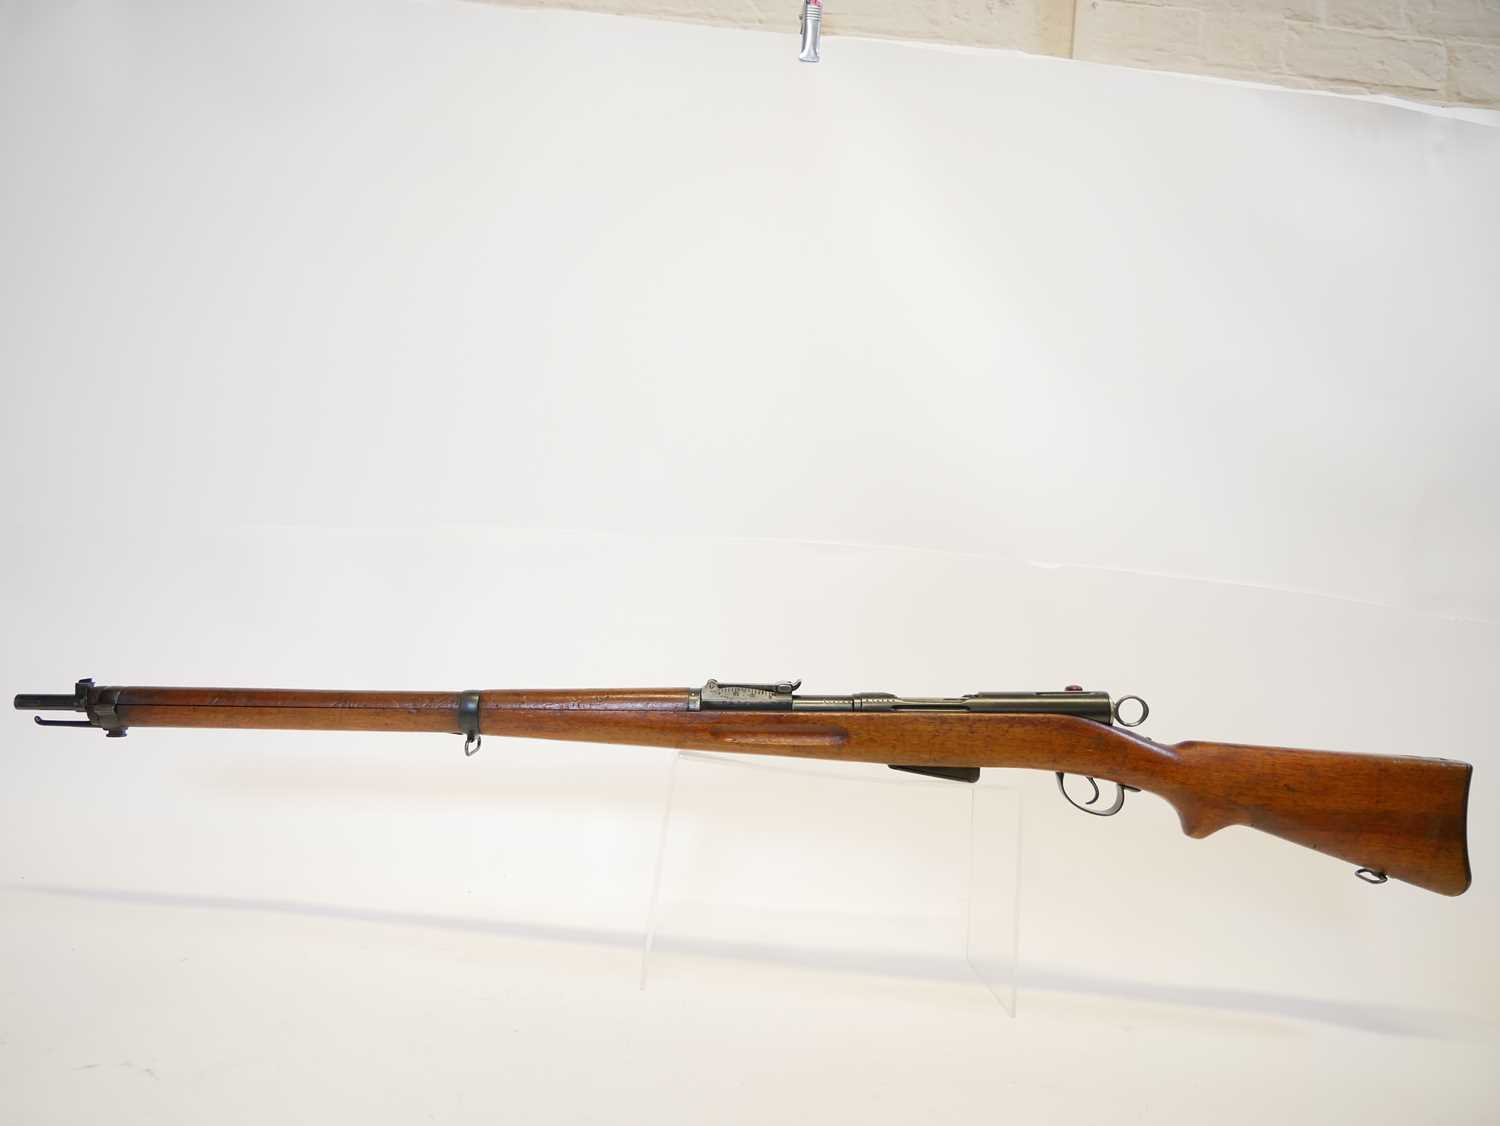 Schmidt Rubin 1896/ 1911 7.5mm straight pull rifle, matching serial numbers 314149 to barrel, - Image 20 of 20